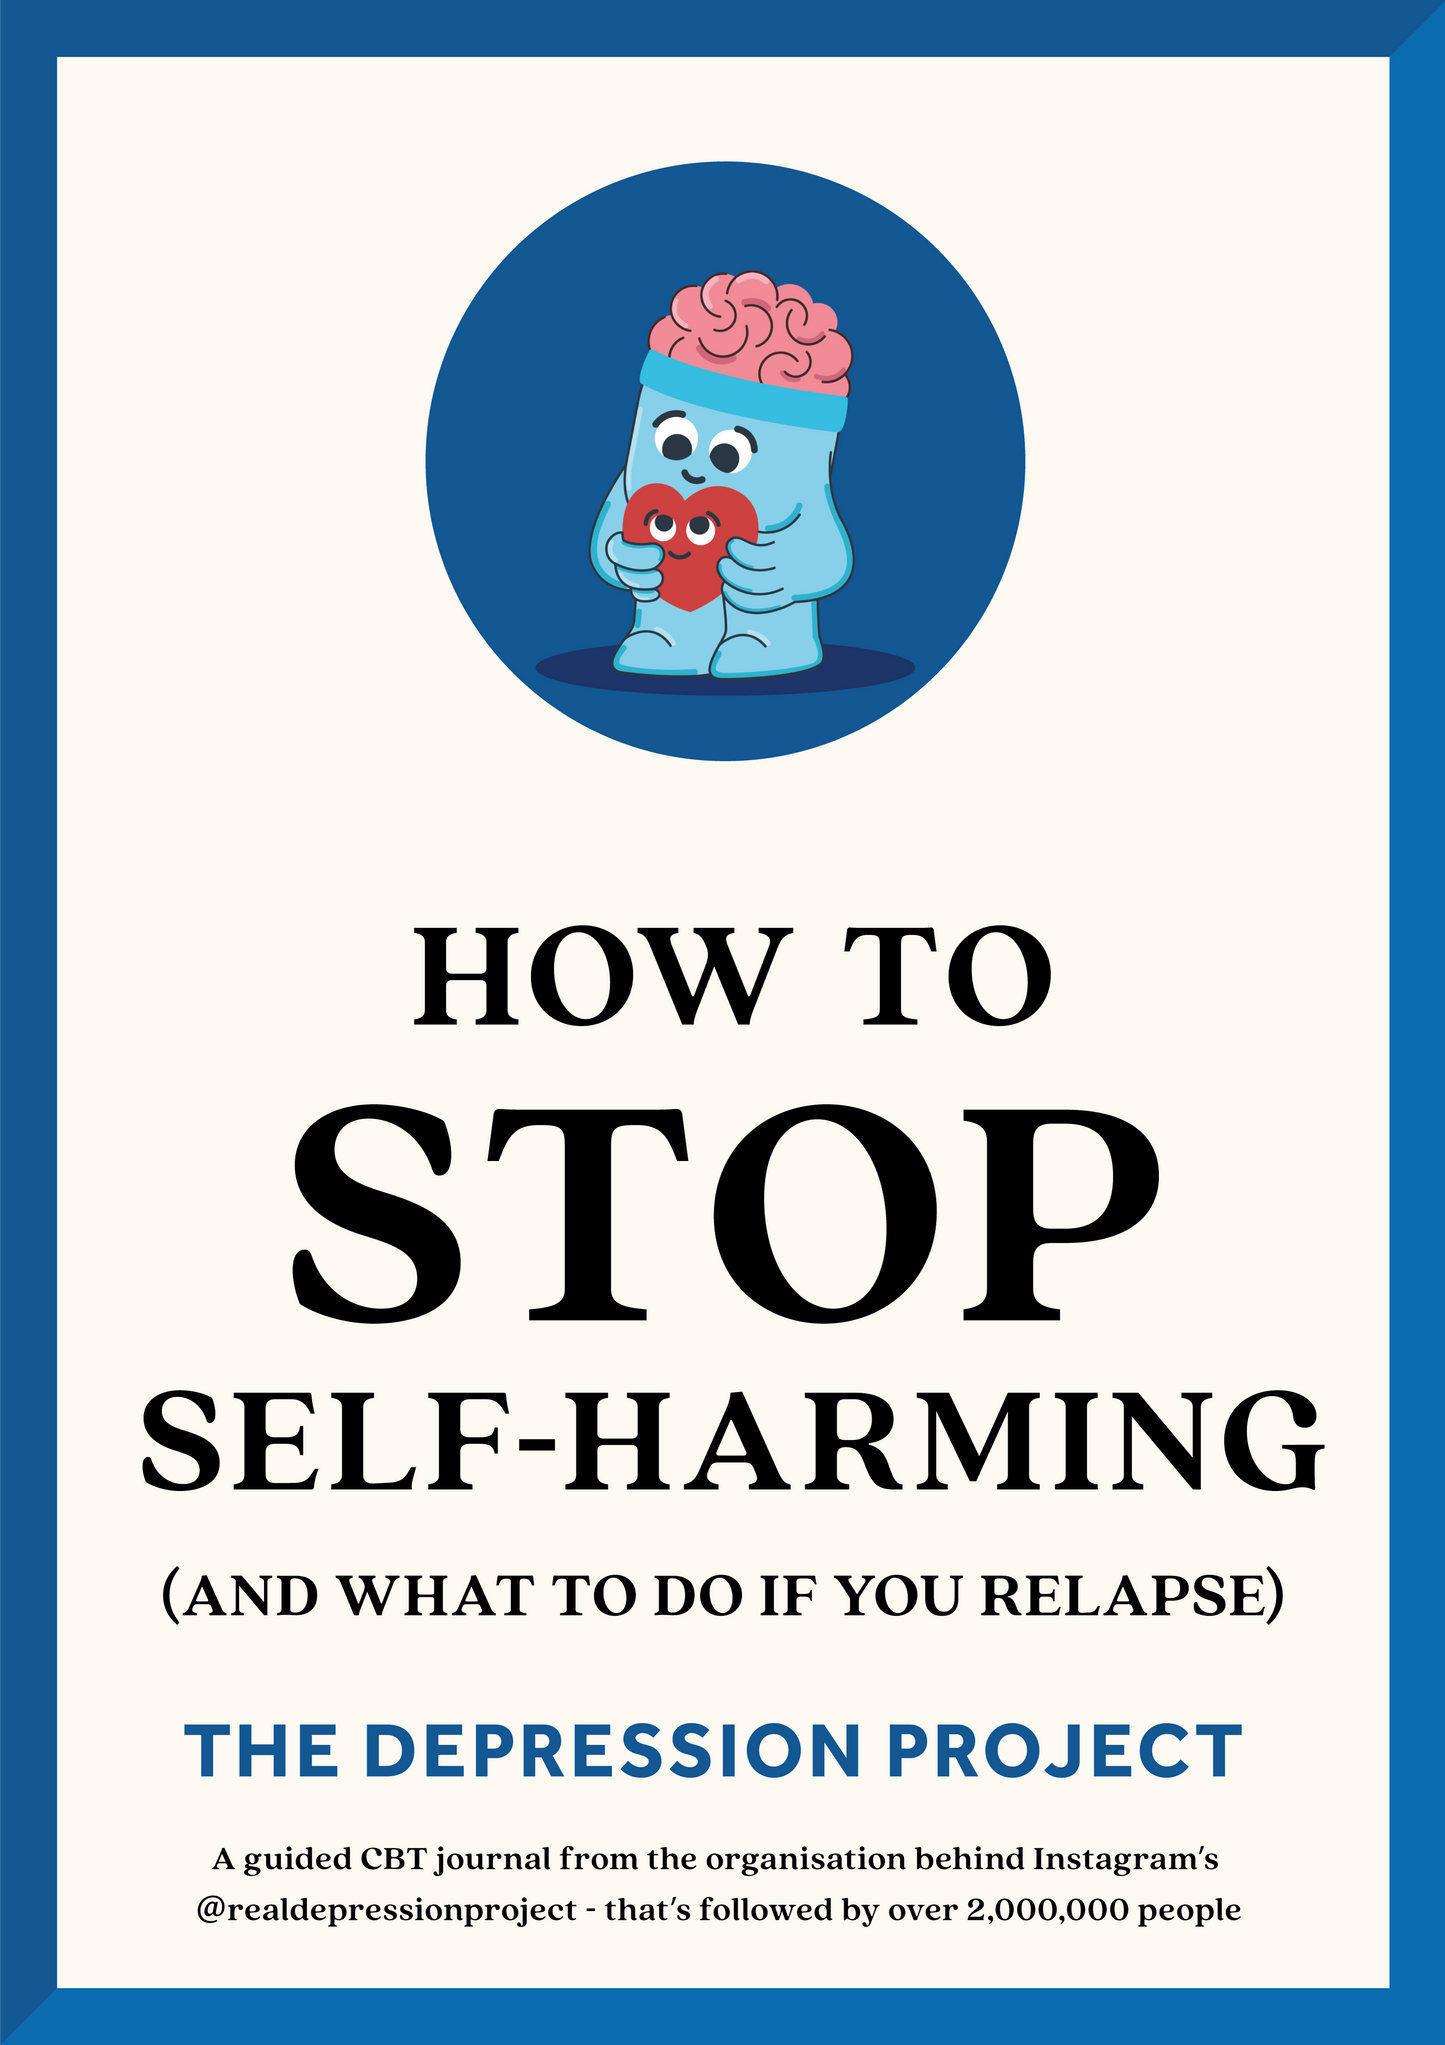 How To Stop Self-Harming And What To Do If You Relapse